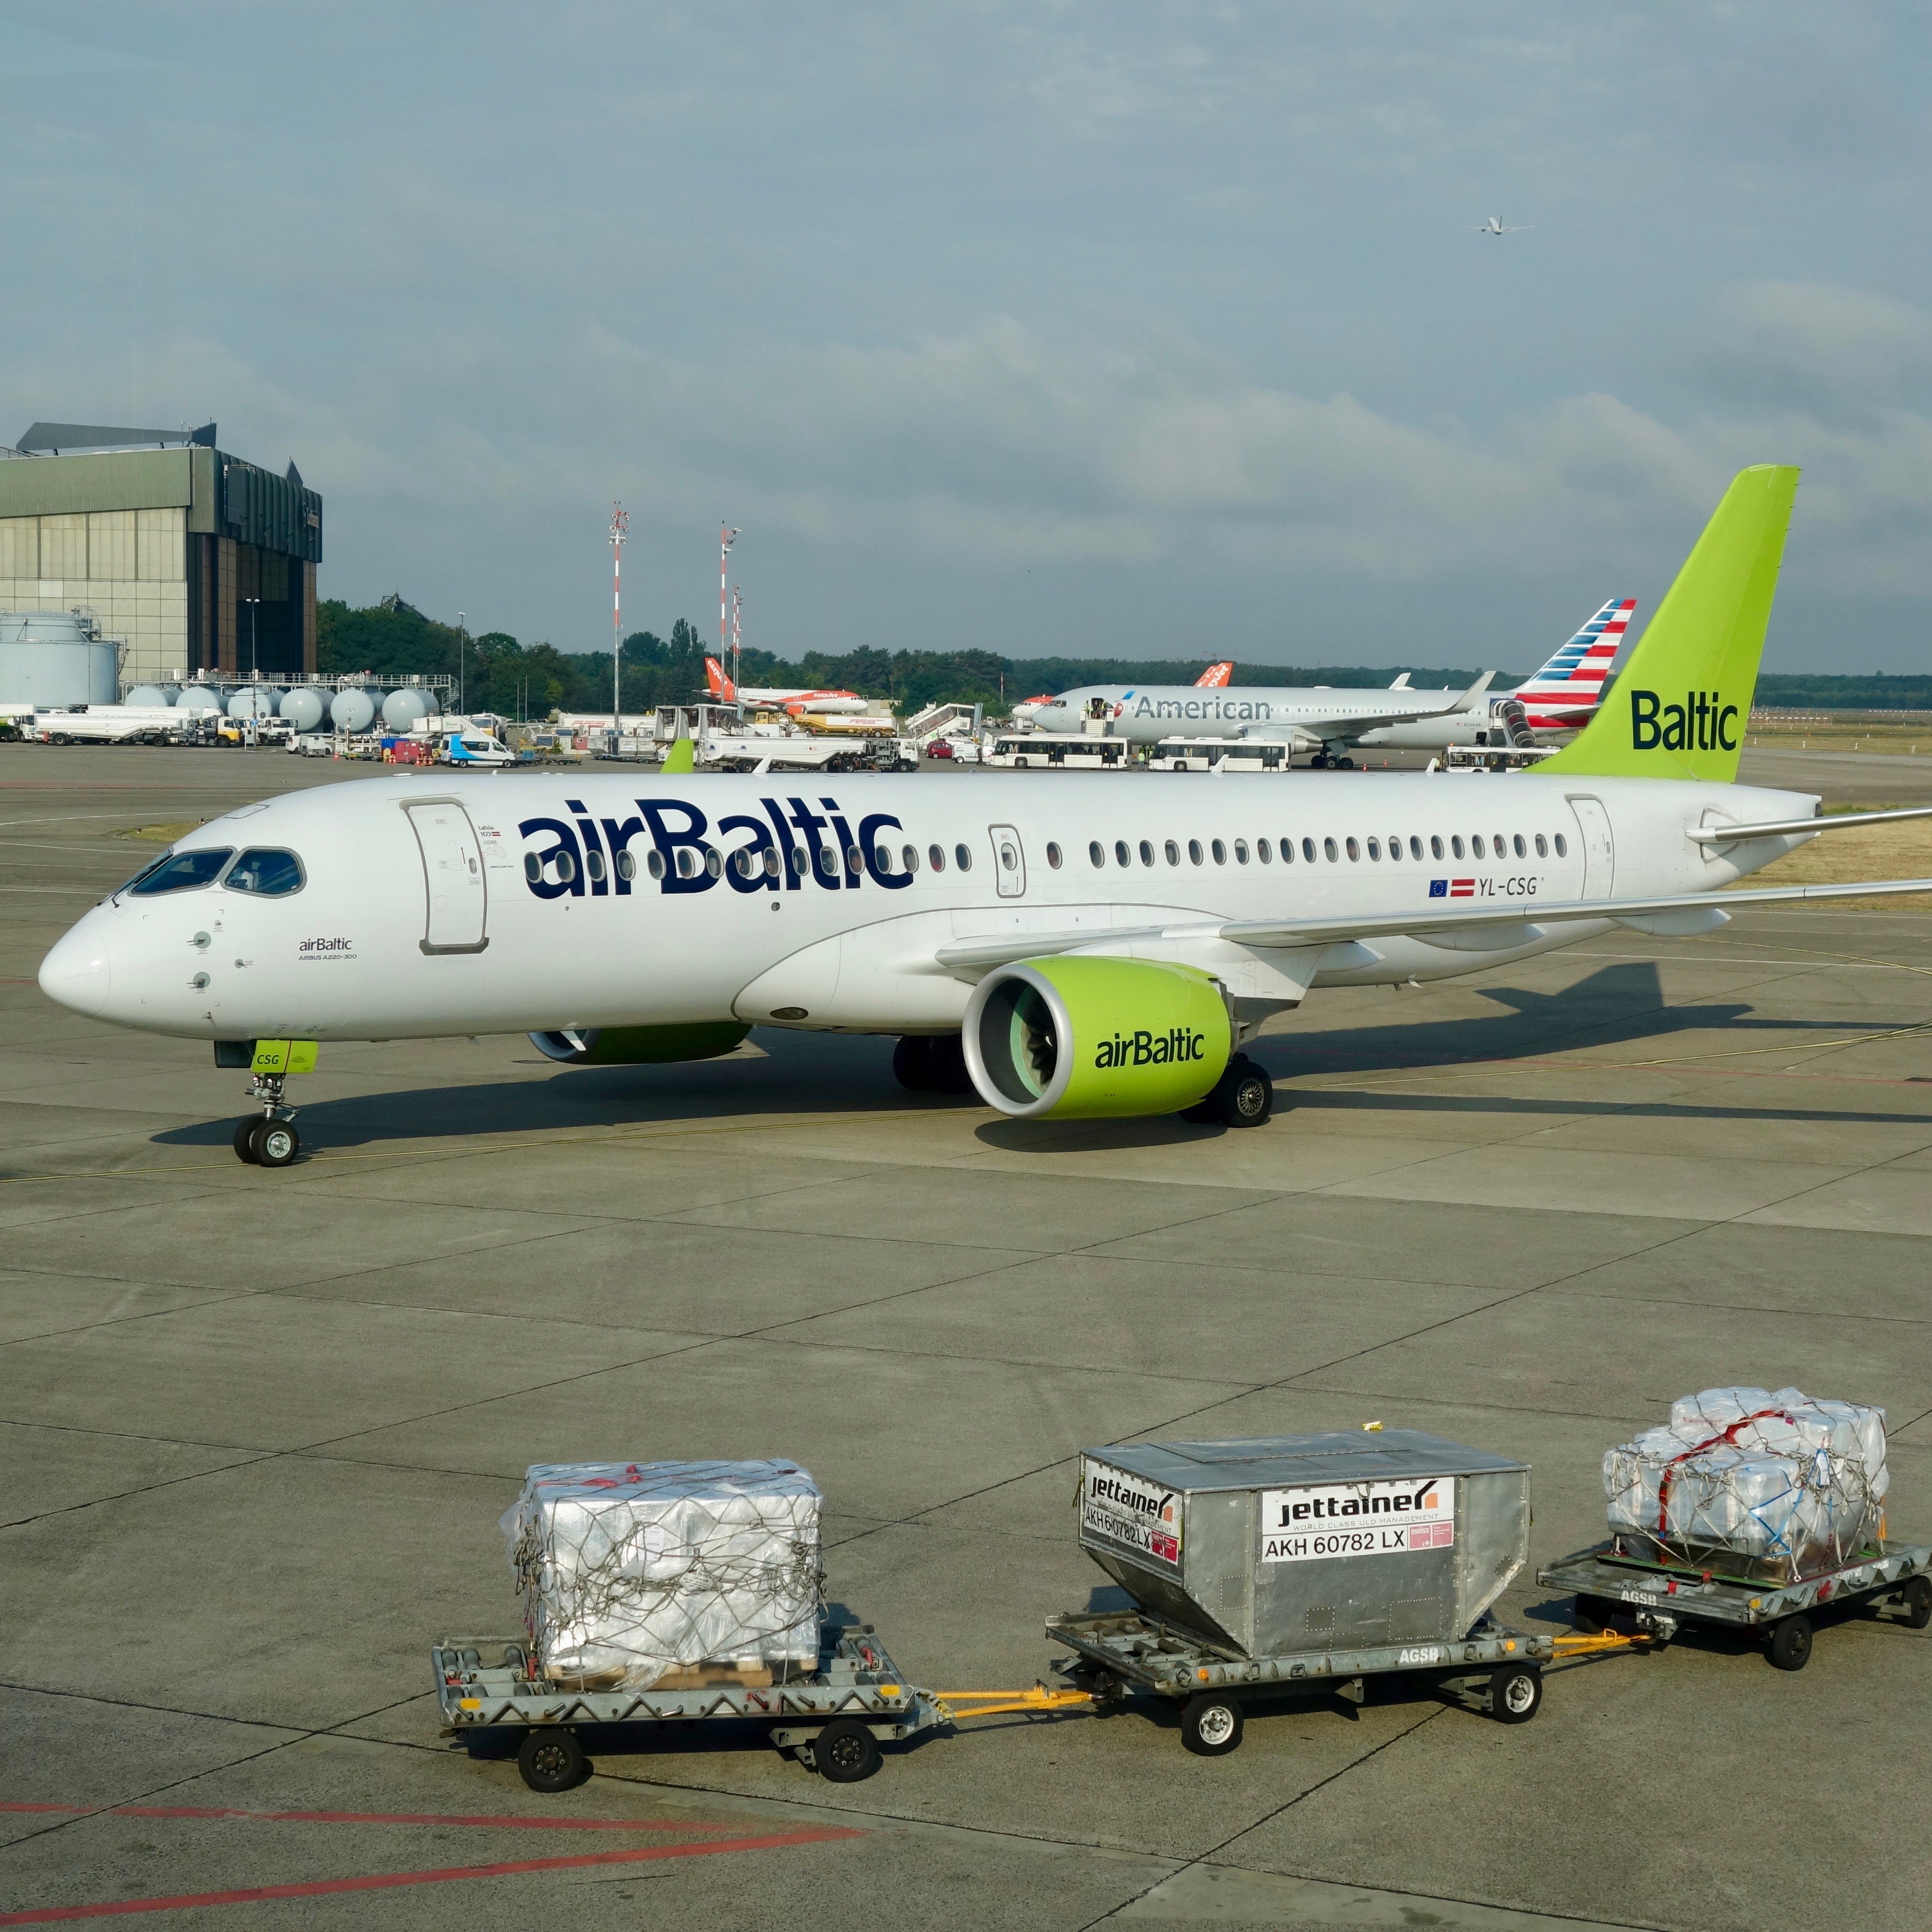 An airBaltic Airbus 220 pulls into the gate at Berlin Tegel Airport while an American Airlines 767 receives servicing on the airport apron.  The new model of aircraft shines with the bright green engines and tail and prominent blue airline logo on the forward fuselage.  This review of the experience reveals an efficient airline with modern services. 